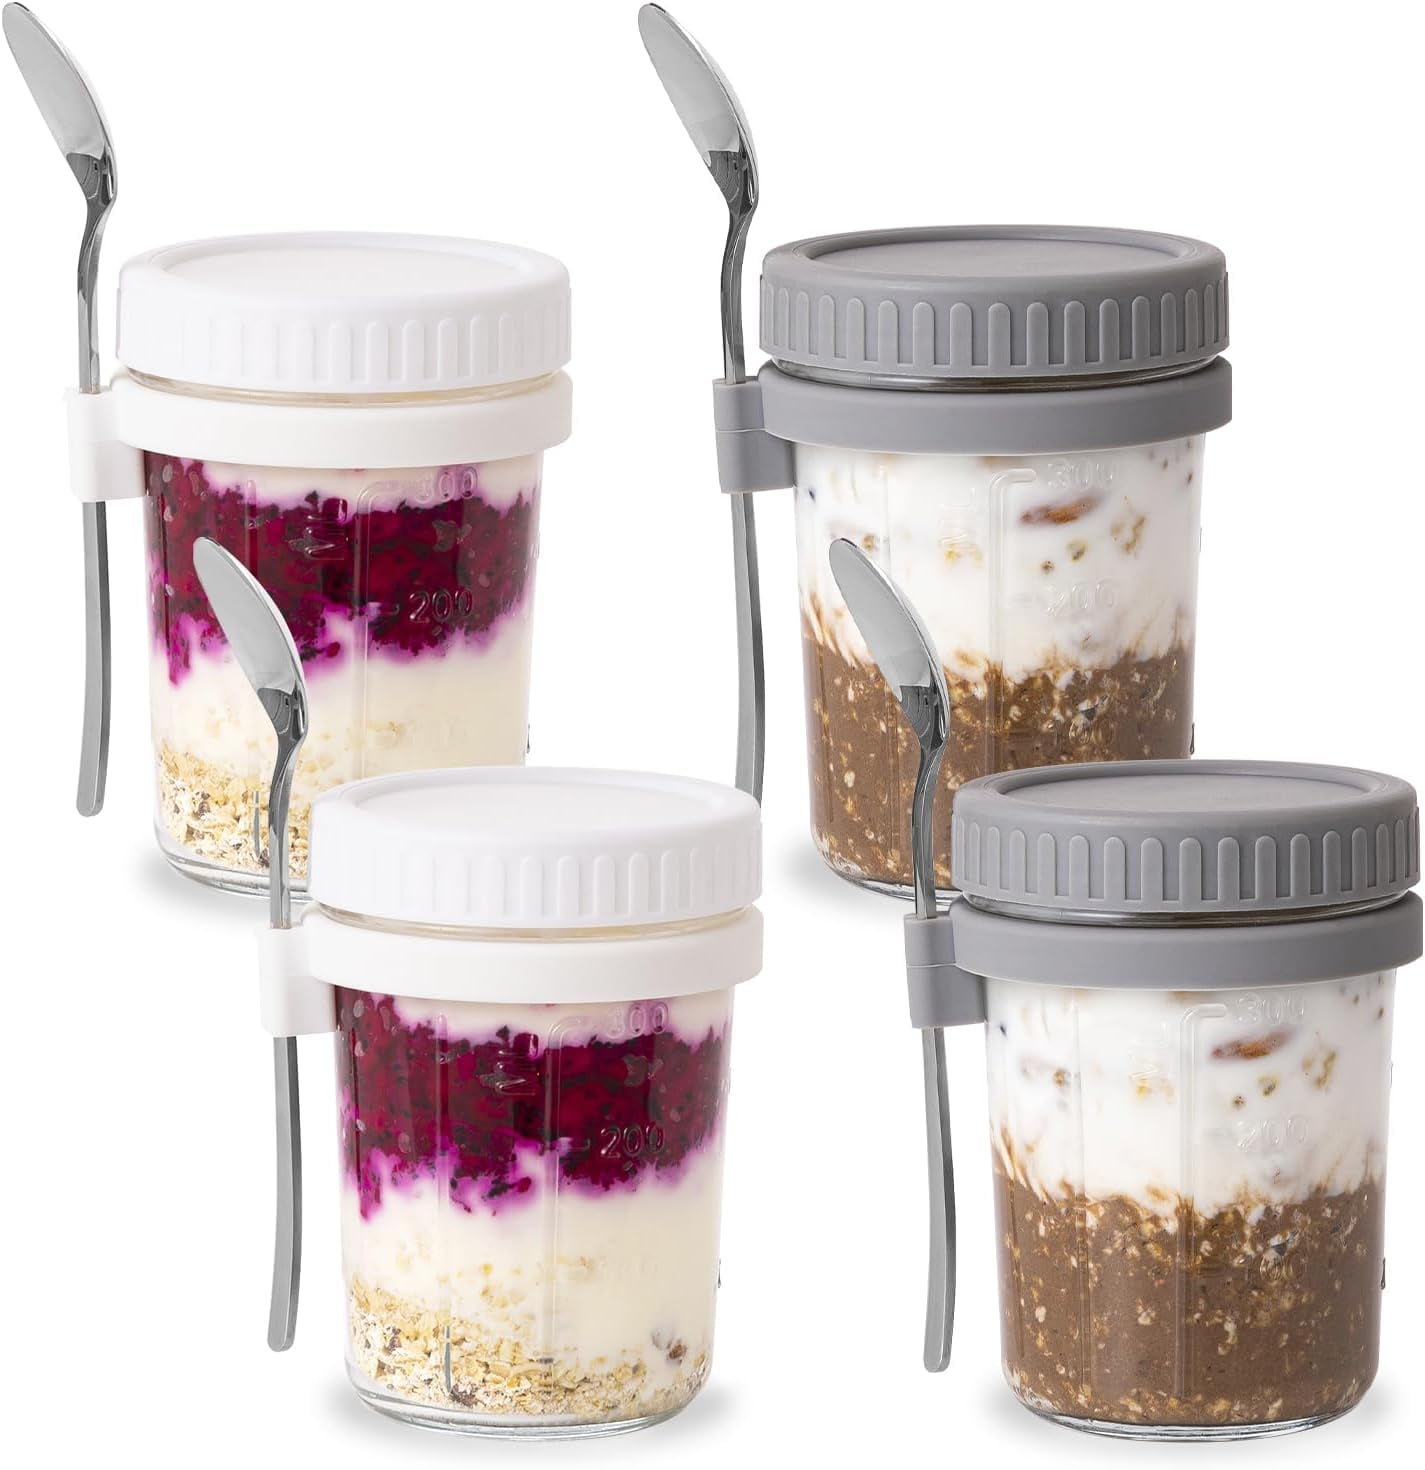 FISHOAKY 4 Pack Overnight Oats Containers with Lids and Spoons, 12